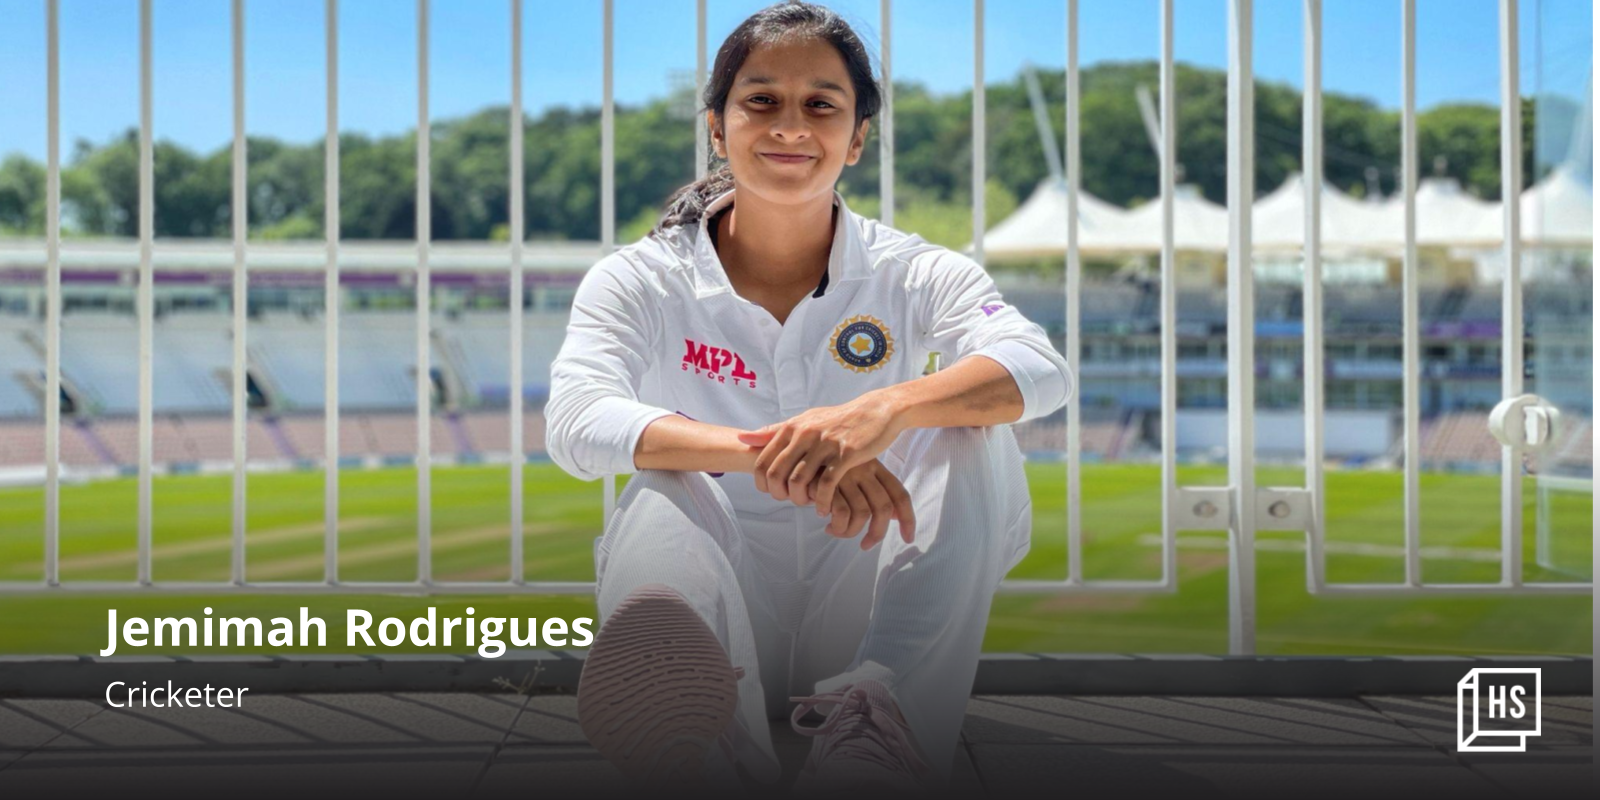 Cricketer Jemimah Rodrigues on being dropped, her comeback, and more